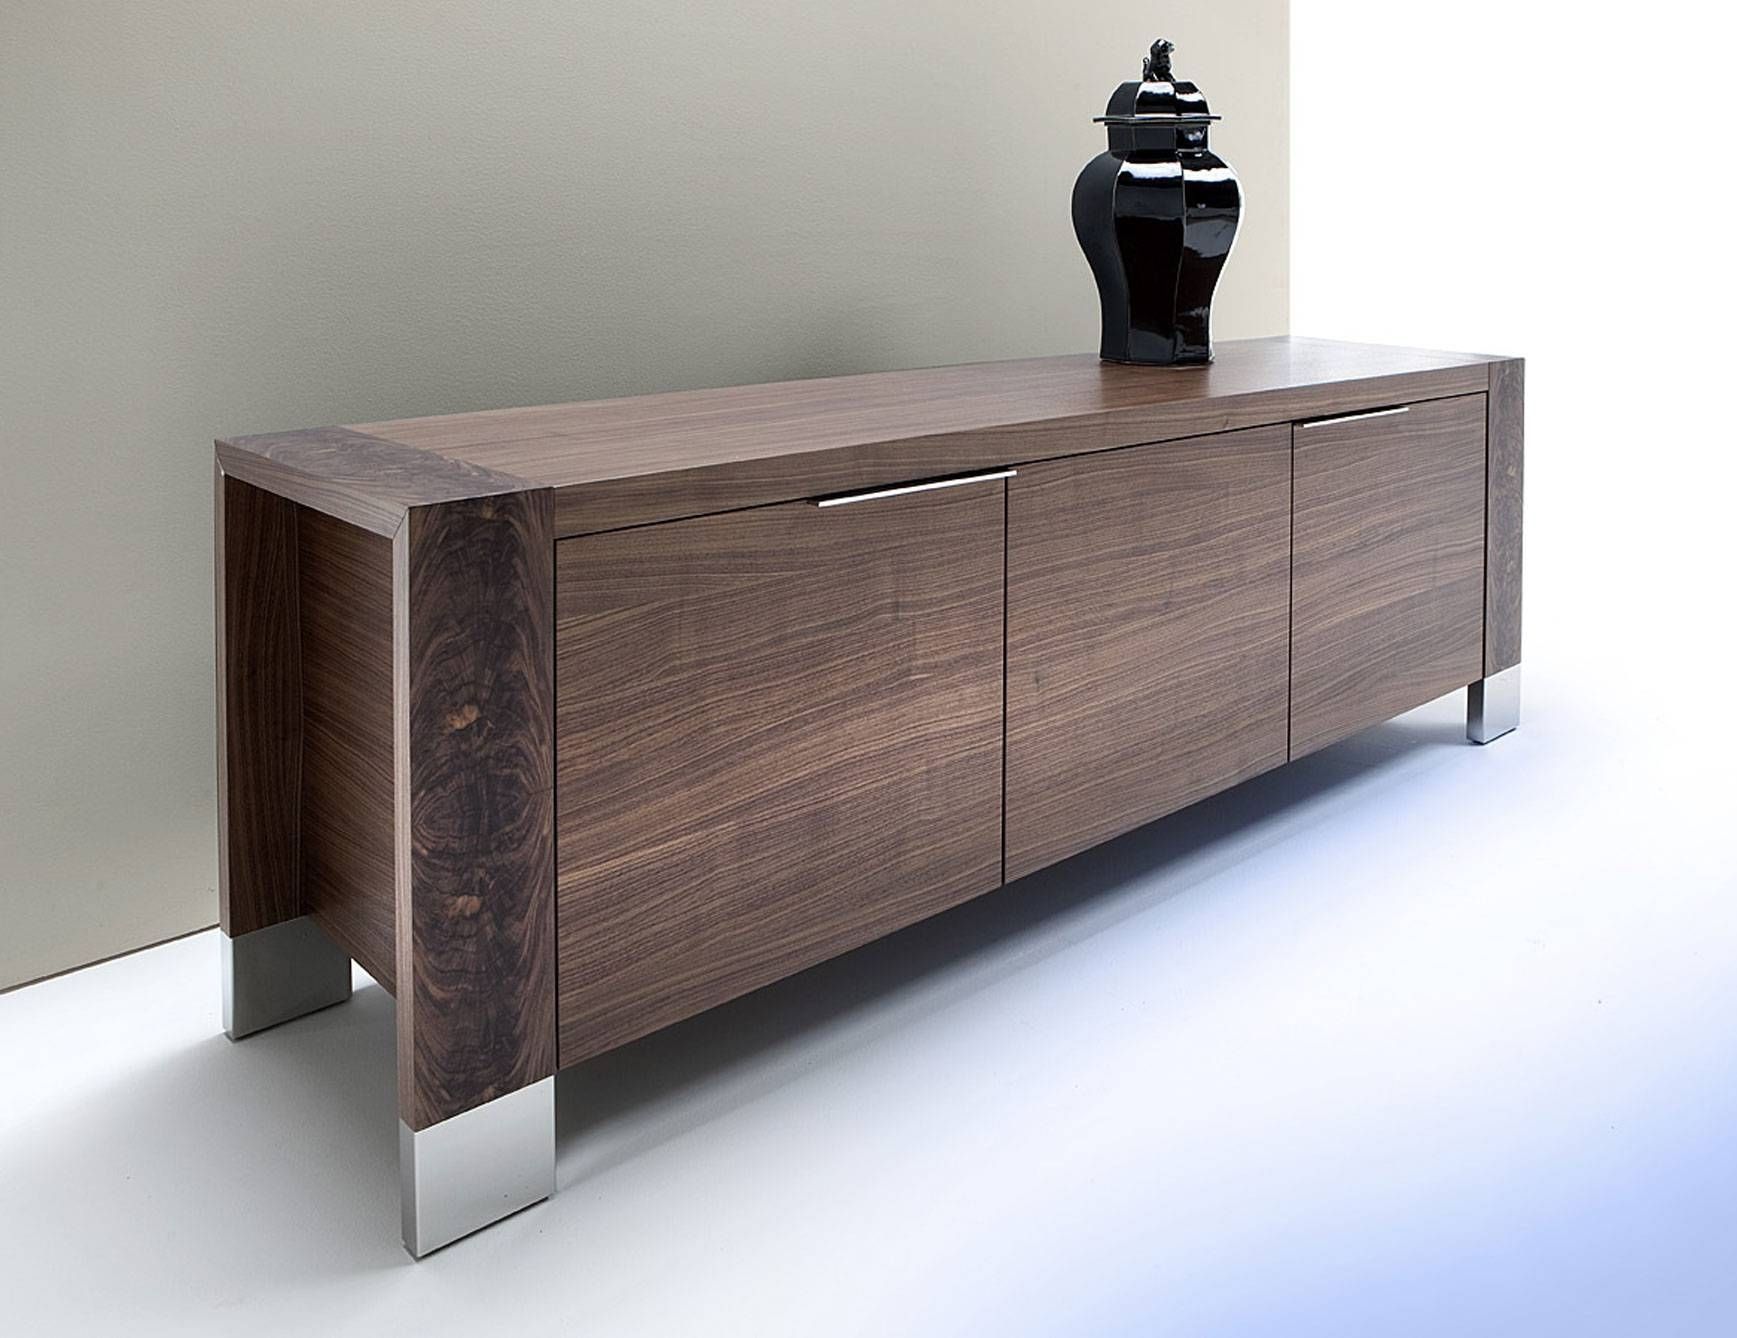 Sideboards: Amusing Buffet Storage Credenza Sideboards Credenzas Regarding Modern Sideboards Furniture (View 3 of 20)